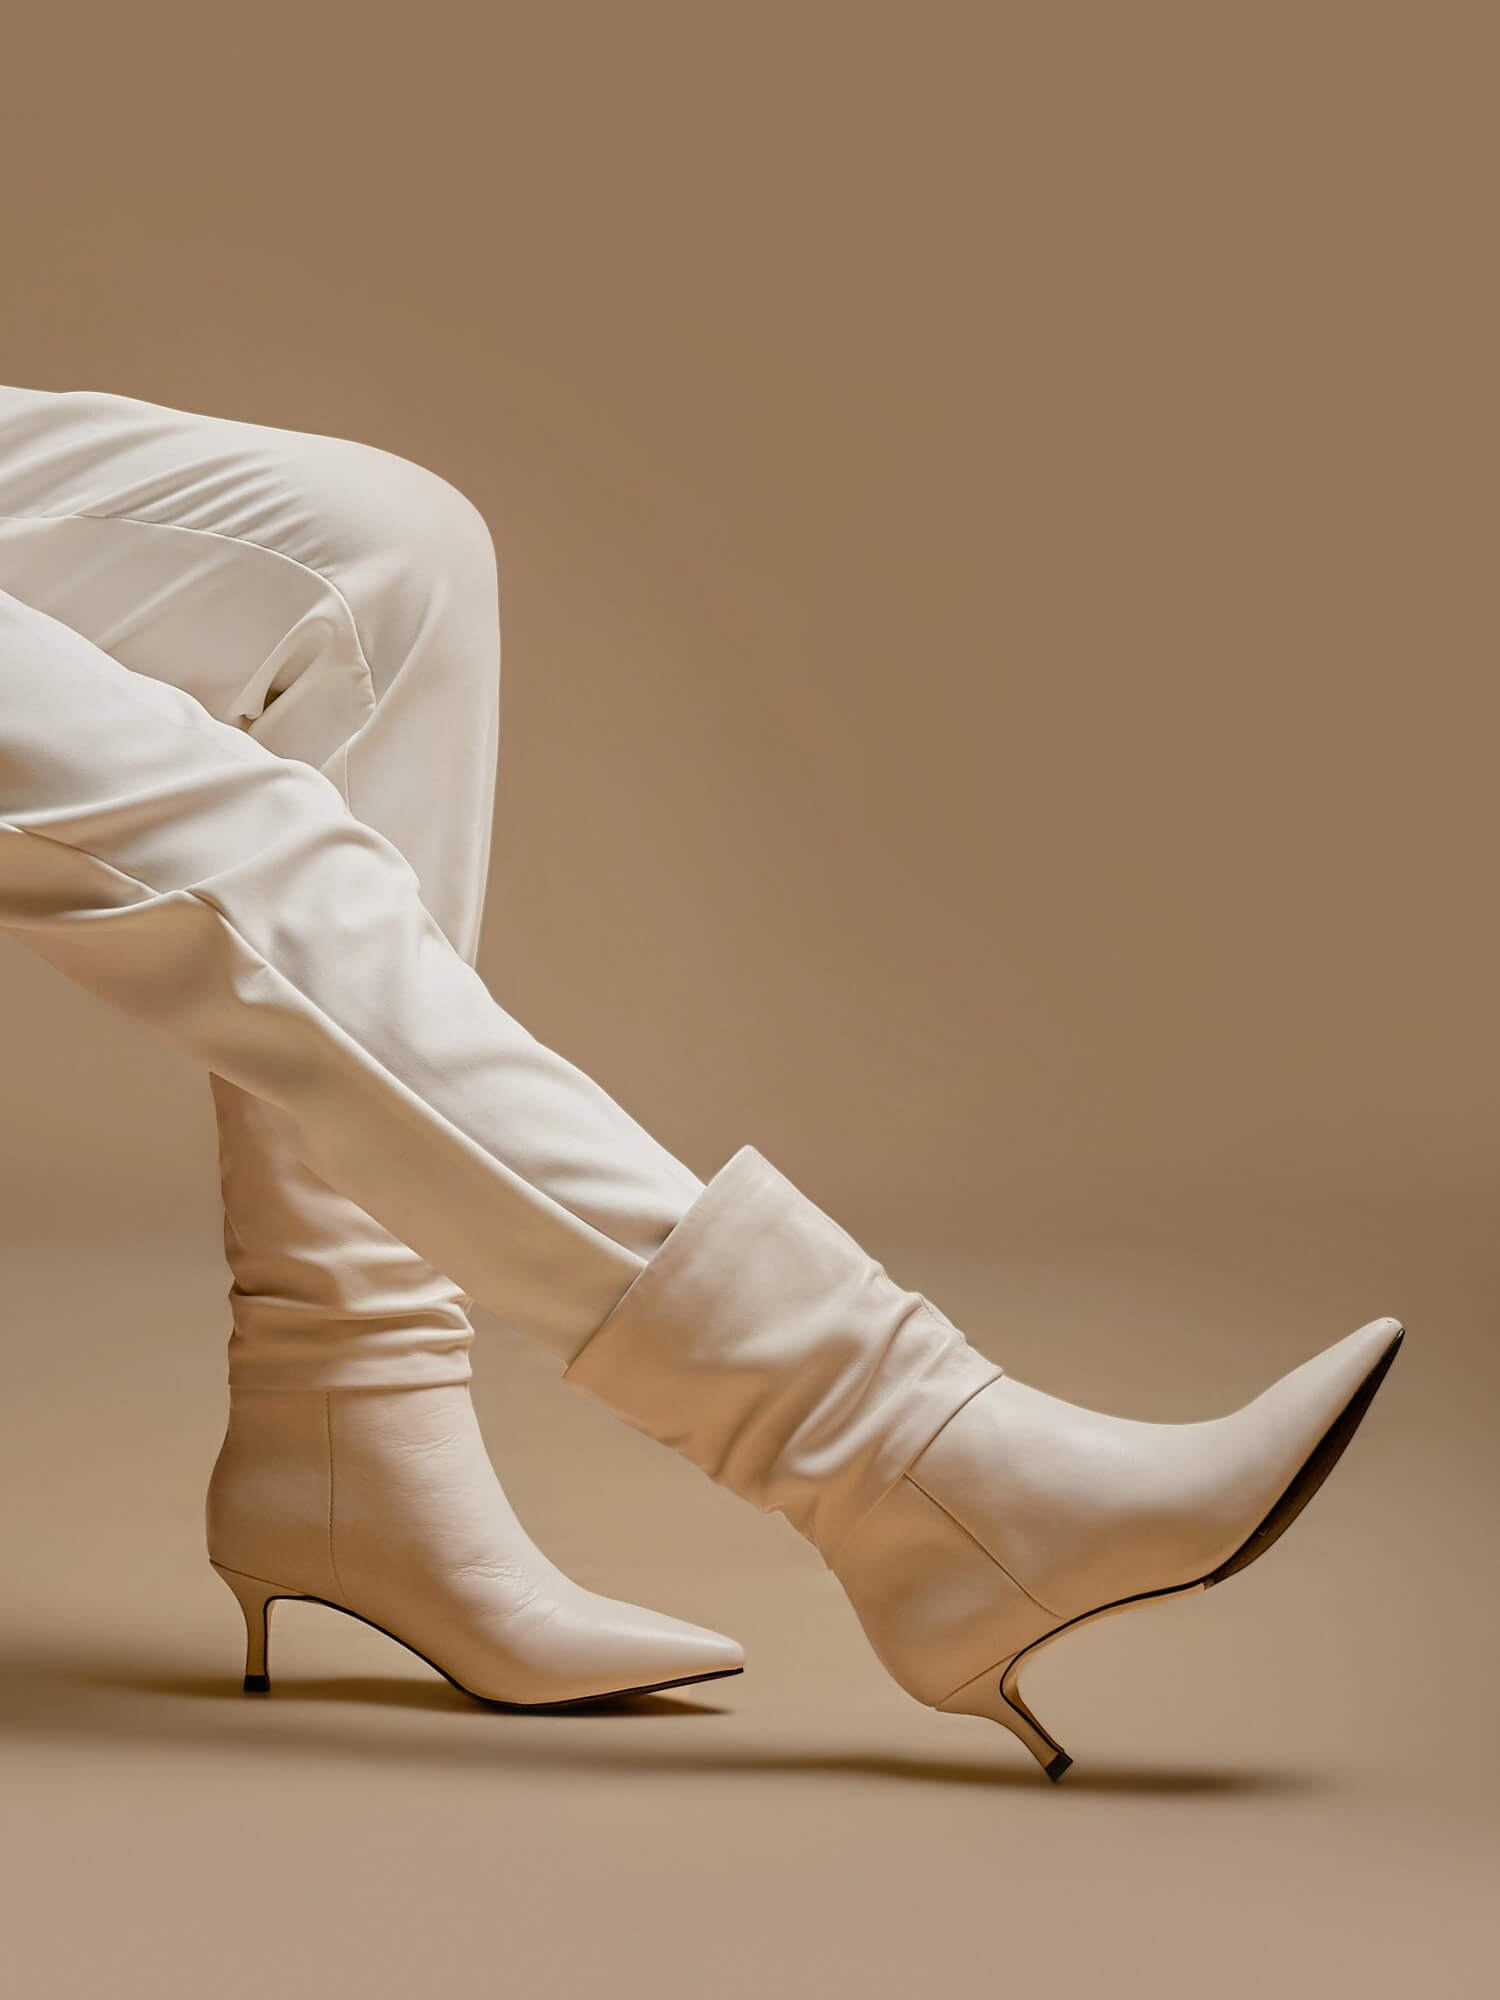 ROLISA-Milo-Slouchy-Ruched-Leather-Kitten-Heels-Mid-Calf-Boots-White-Model-1